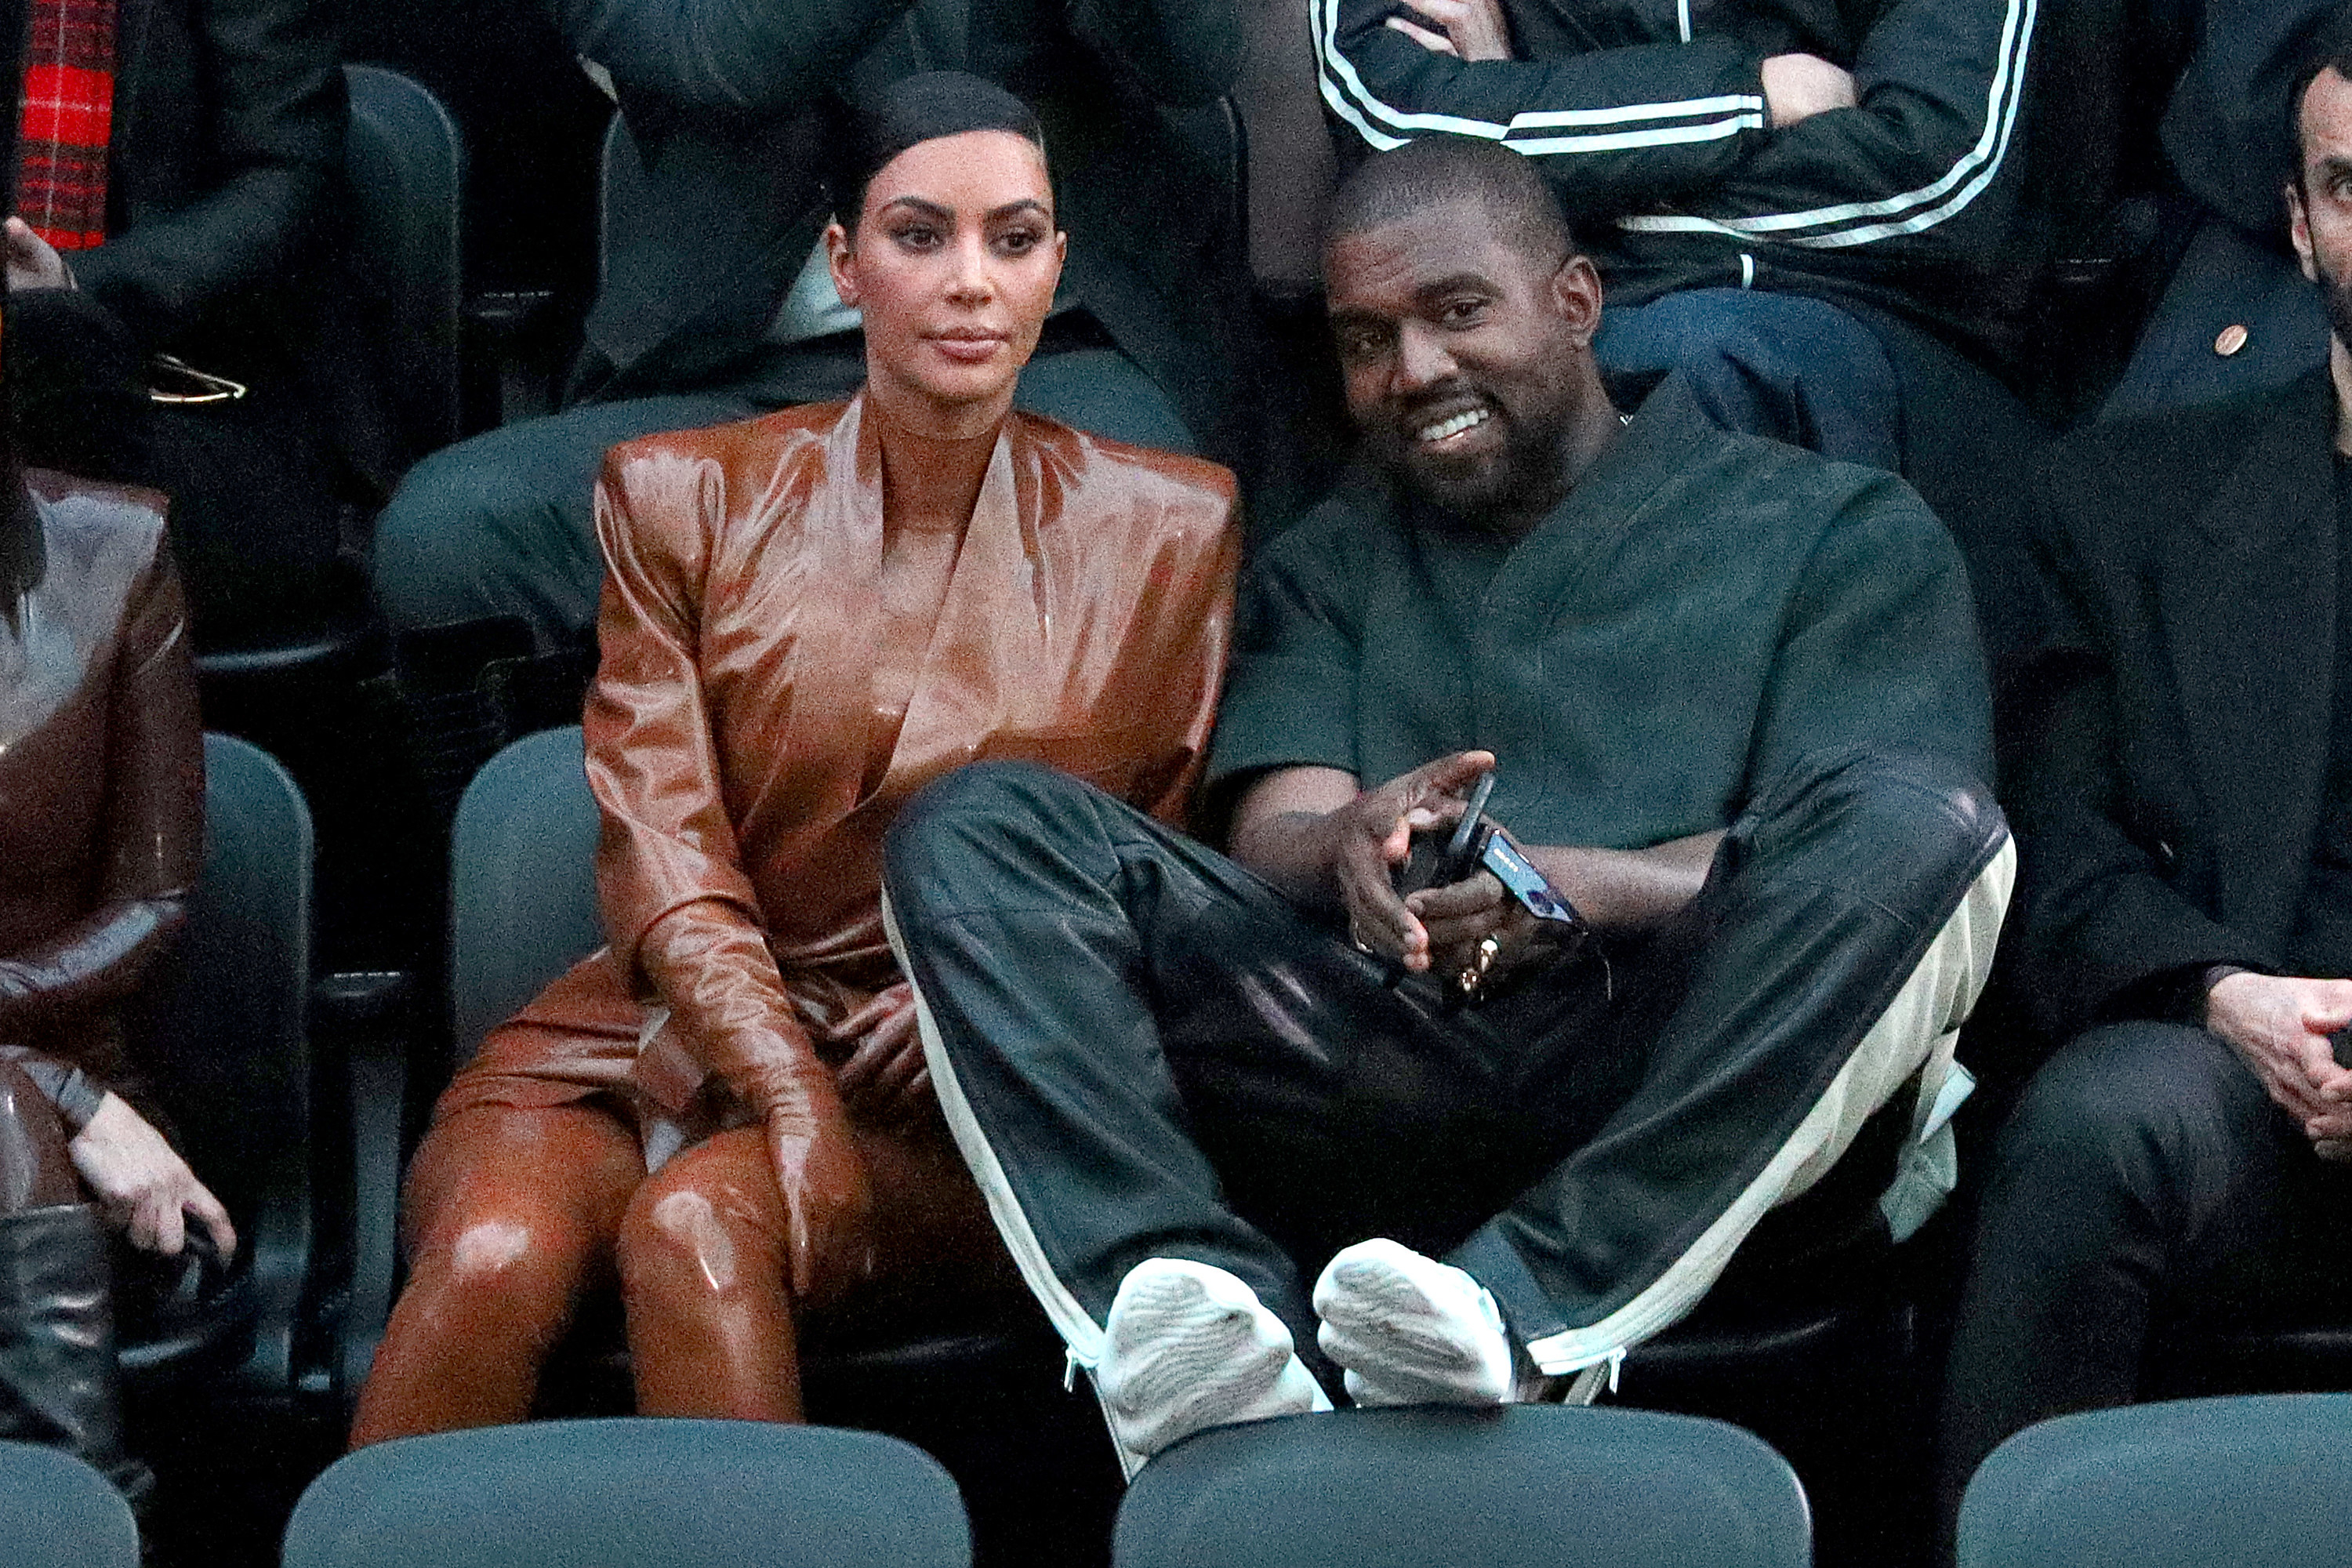 Kanye and Kim sit next to each other